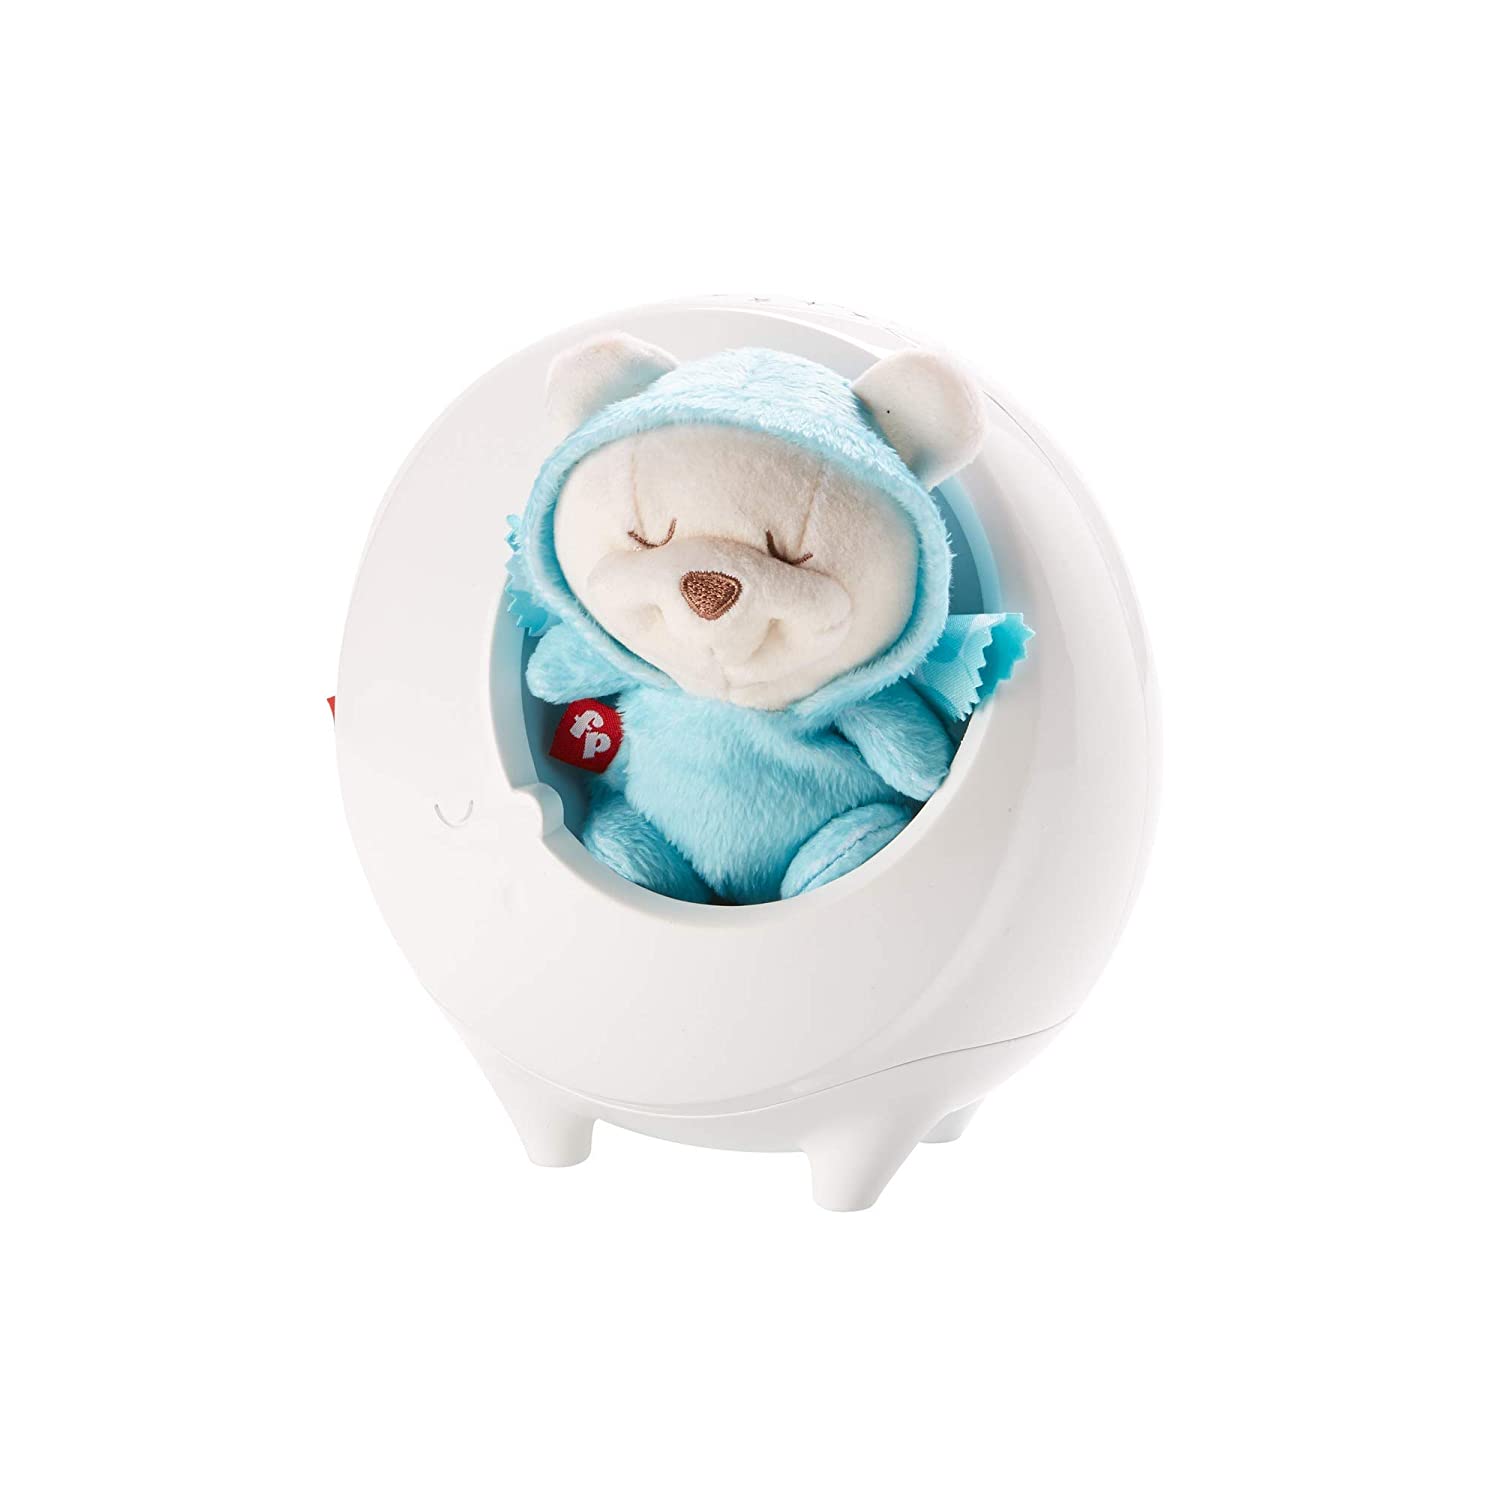 Fisher-Price DYW48 – 2 in 1 Dream Bear Music Box Night Light with Colour Changing Star Light Soft Music and White Noise Baby Equipment from Birth